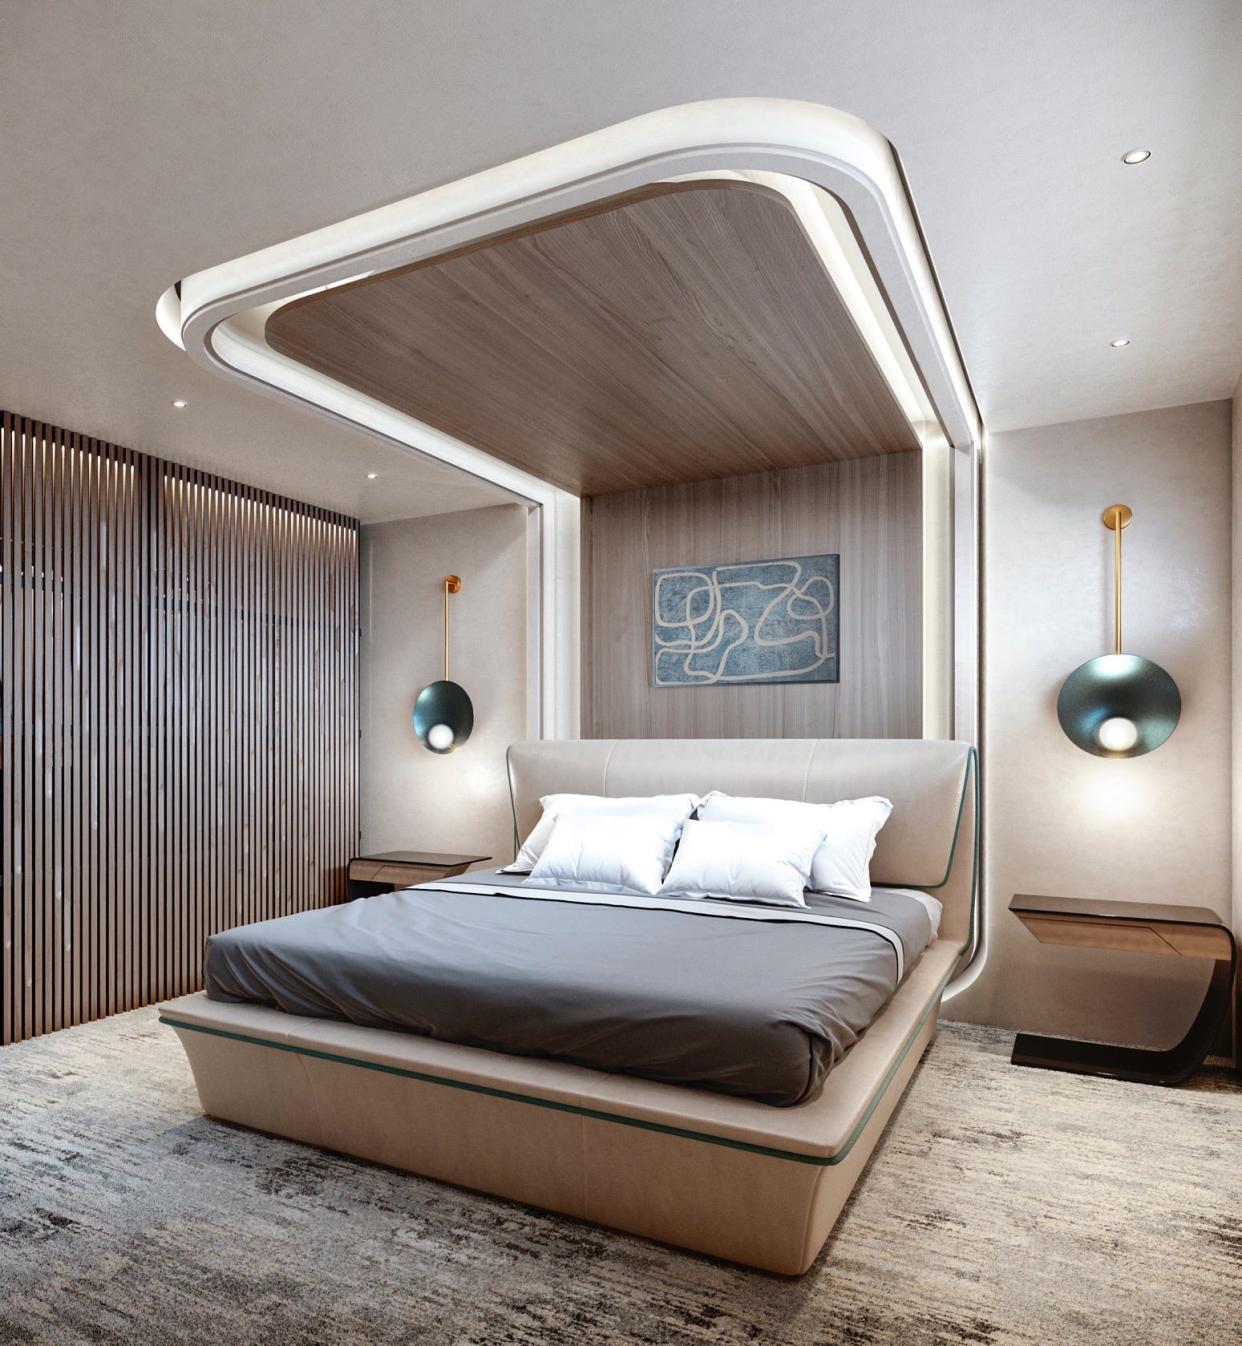 One of the bedrooms aboard the superyacht.